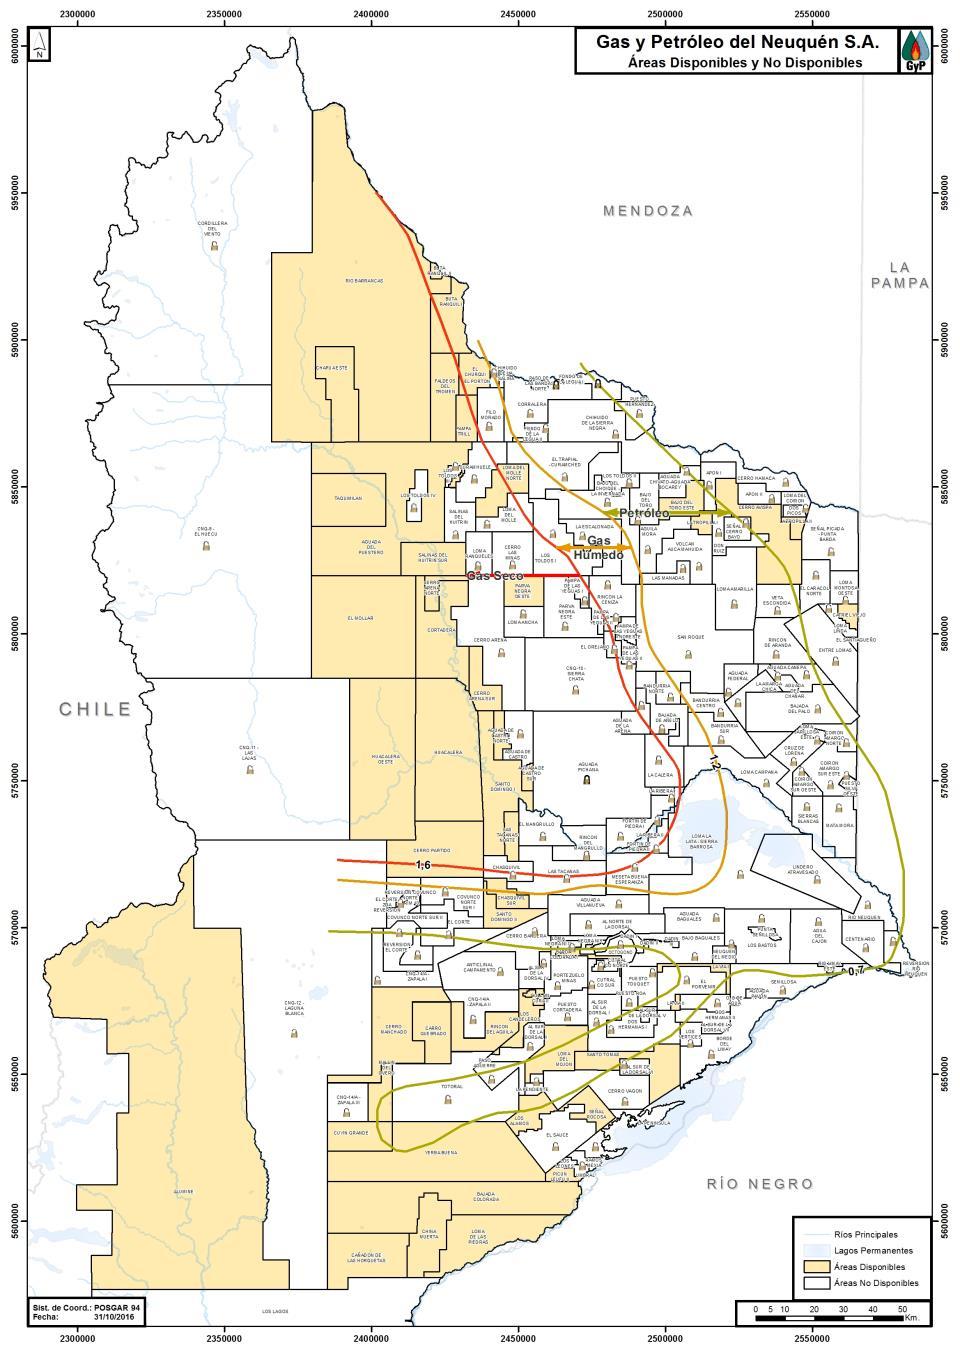 Current Situation The Province of Neuquén has outlined 165 blocks for the exploration, development and exploitation of hydrocarbons in its territory.